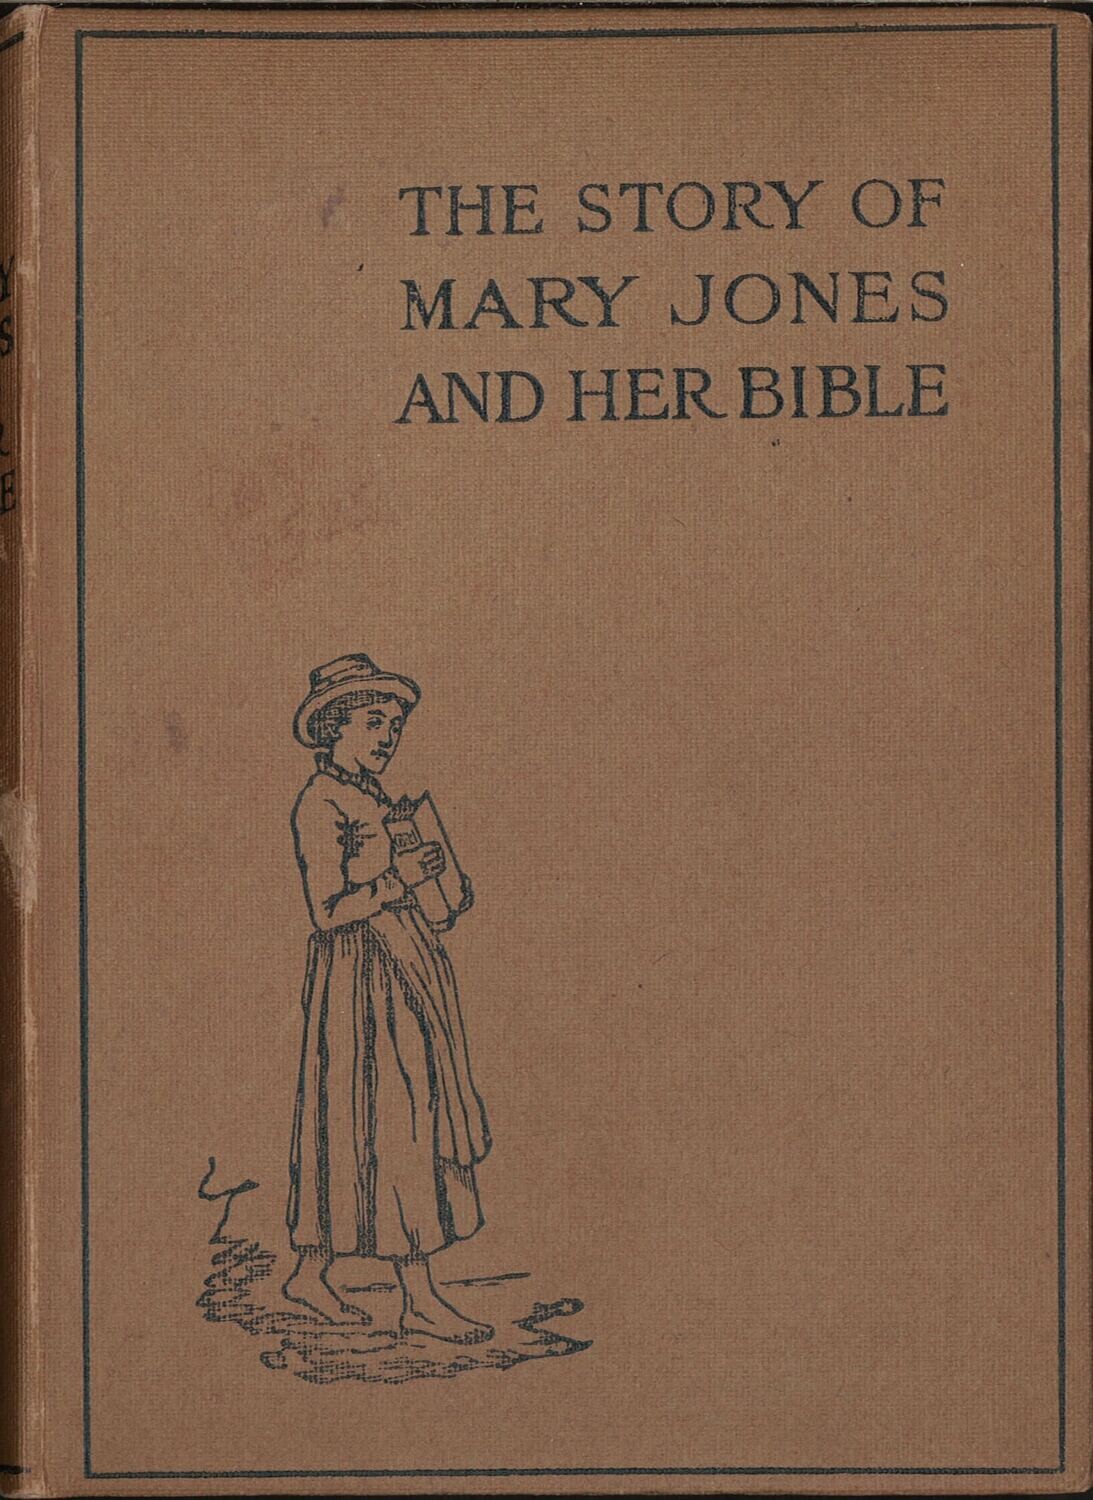 The Story of Mary Jones and Her Bible